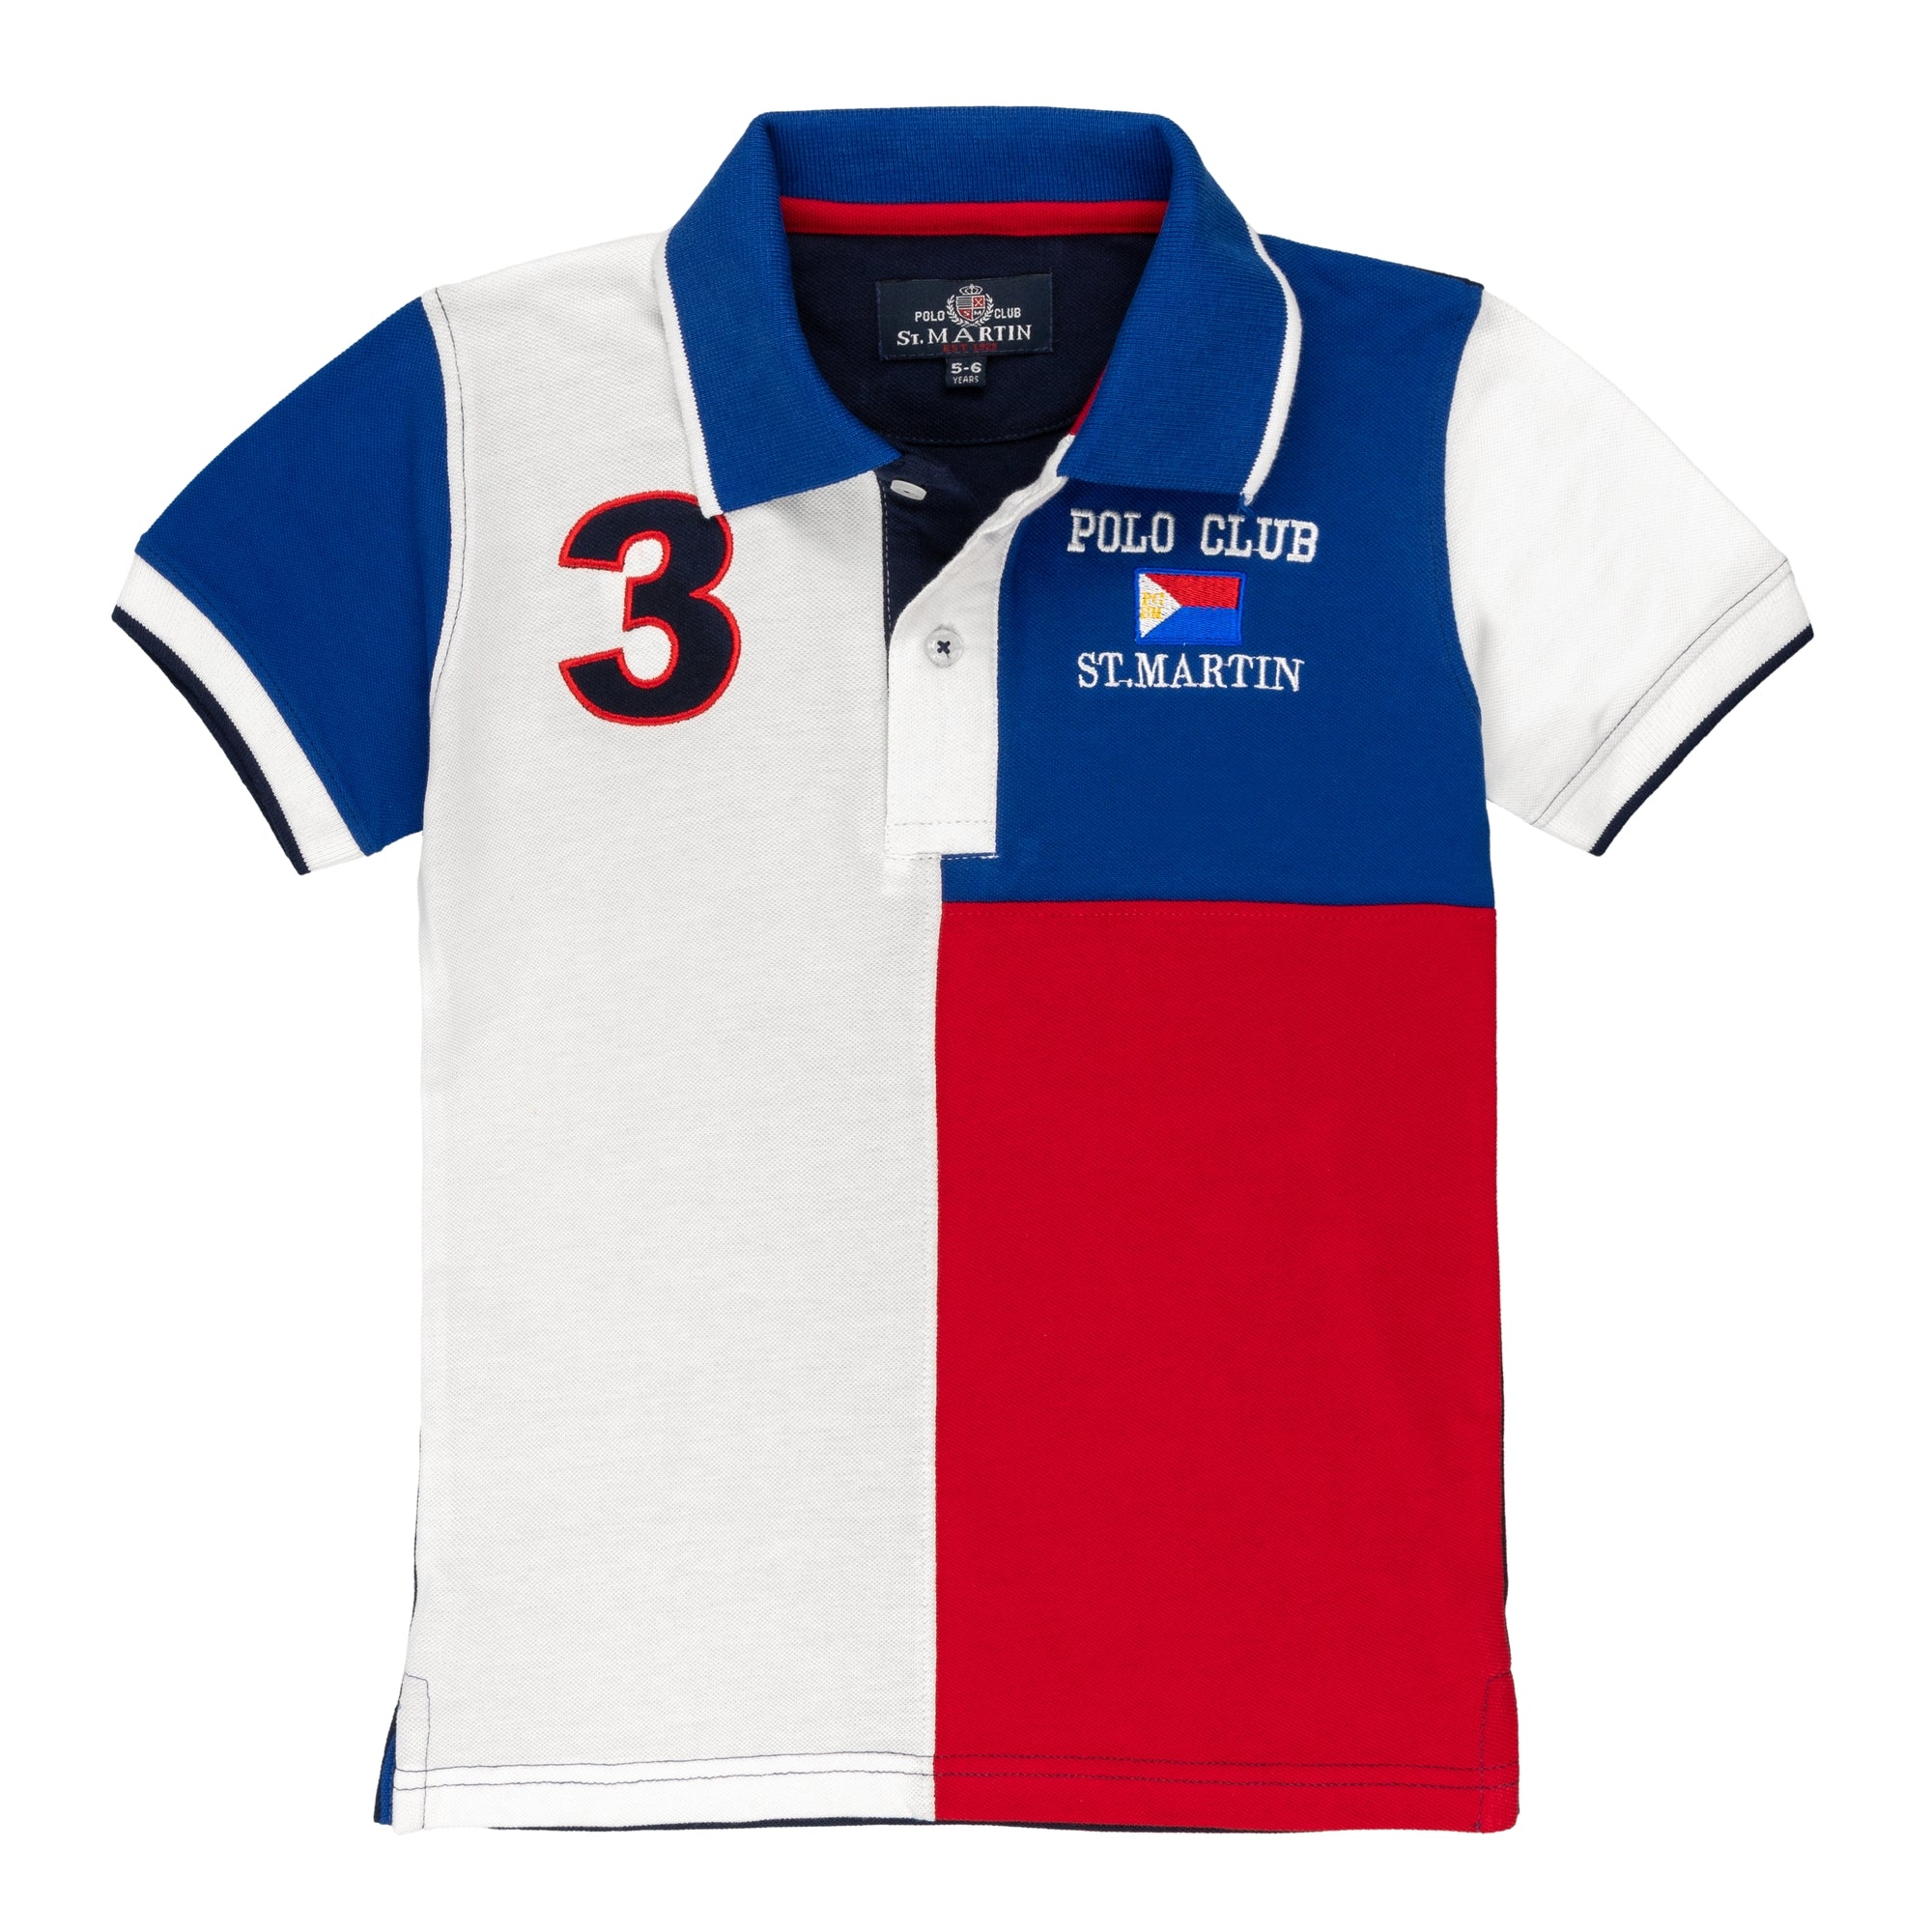 Color block pique polo shirt and number